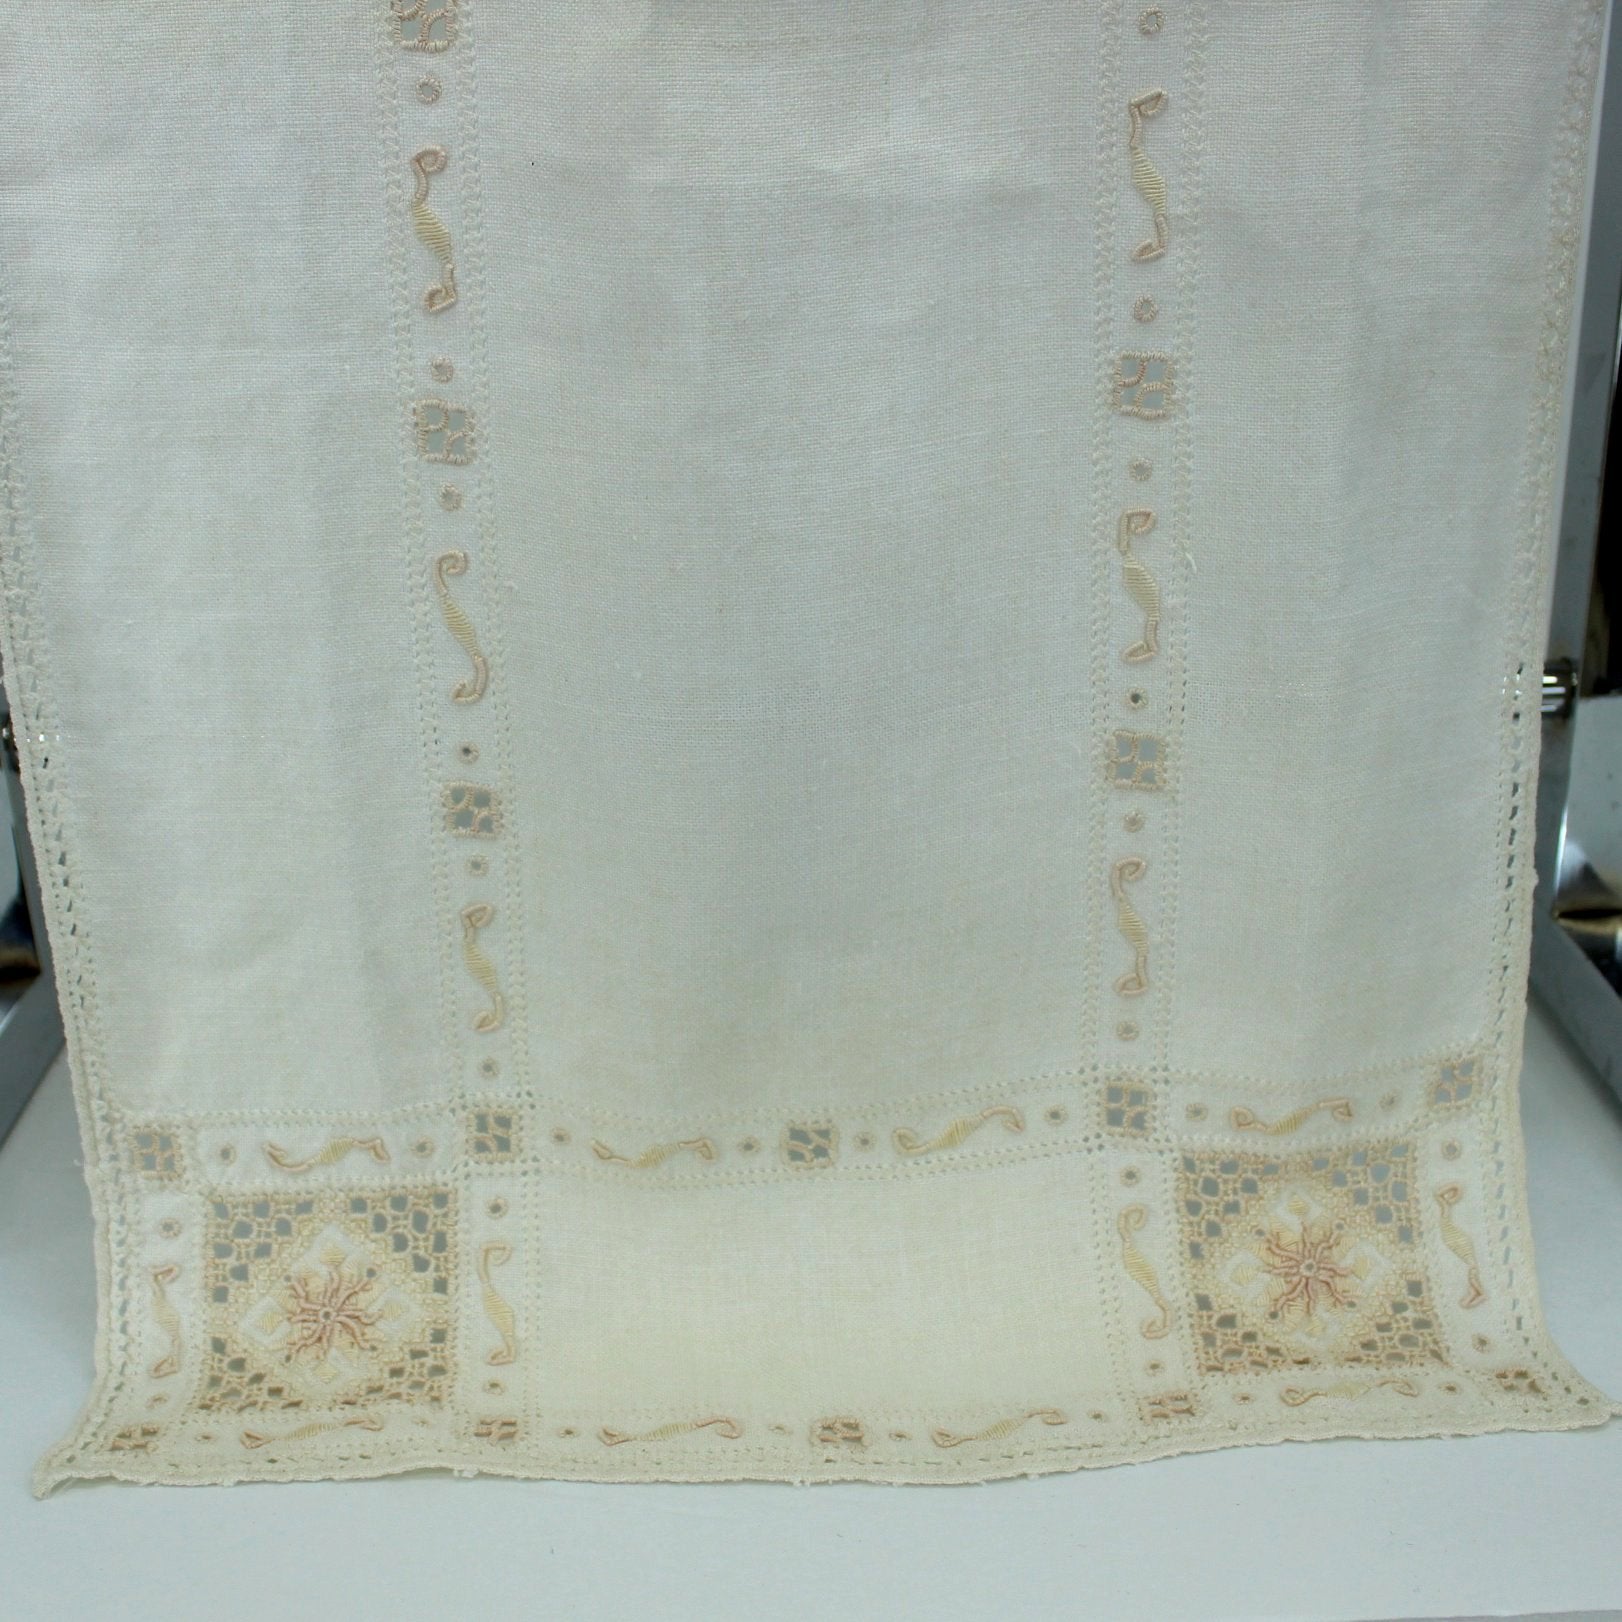 Grand Old Linen Table Runner Embroidery Open Work Edging Hand Made lovely design each end and medallion